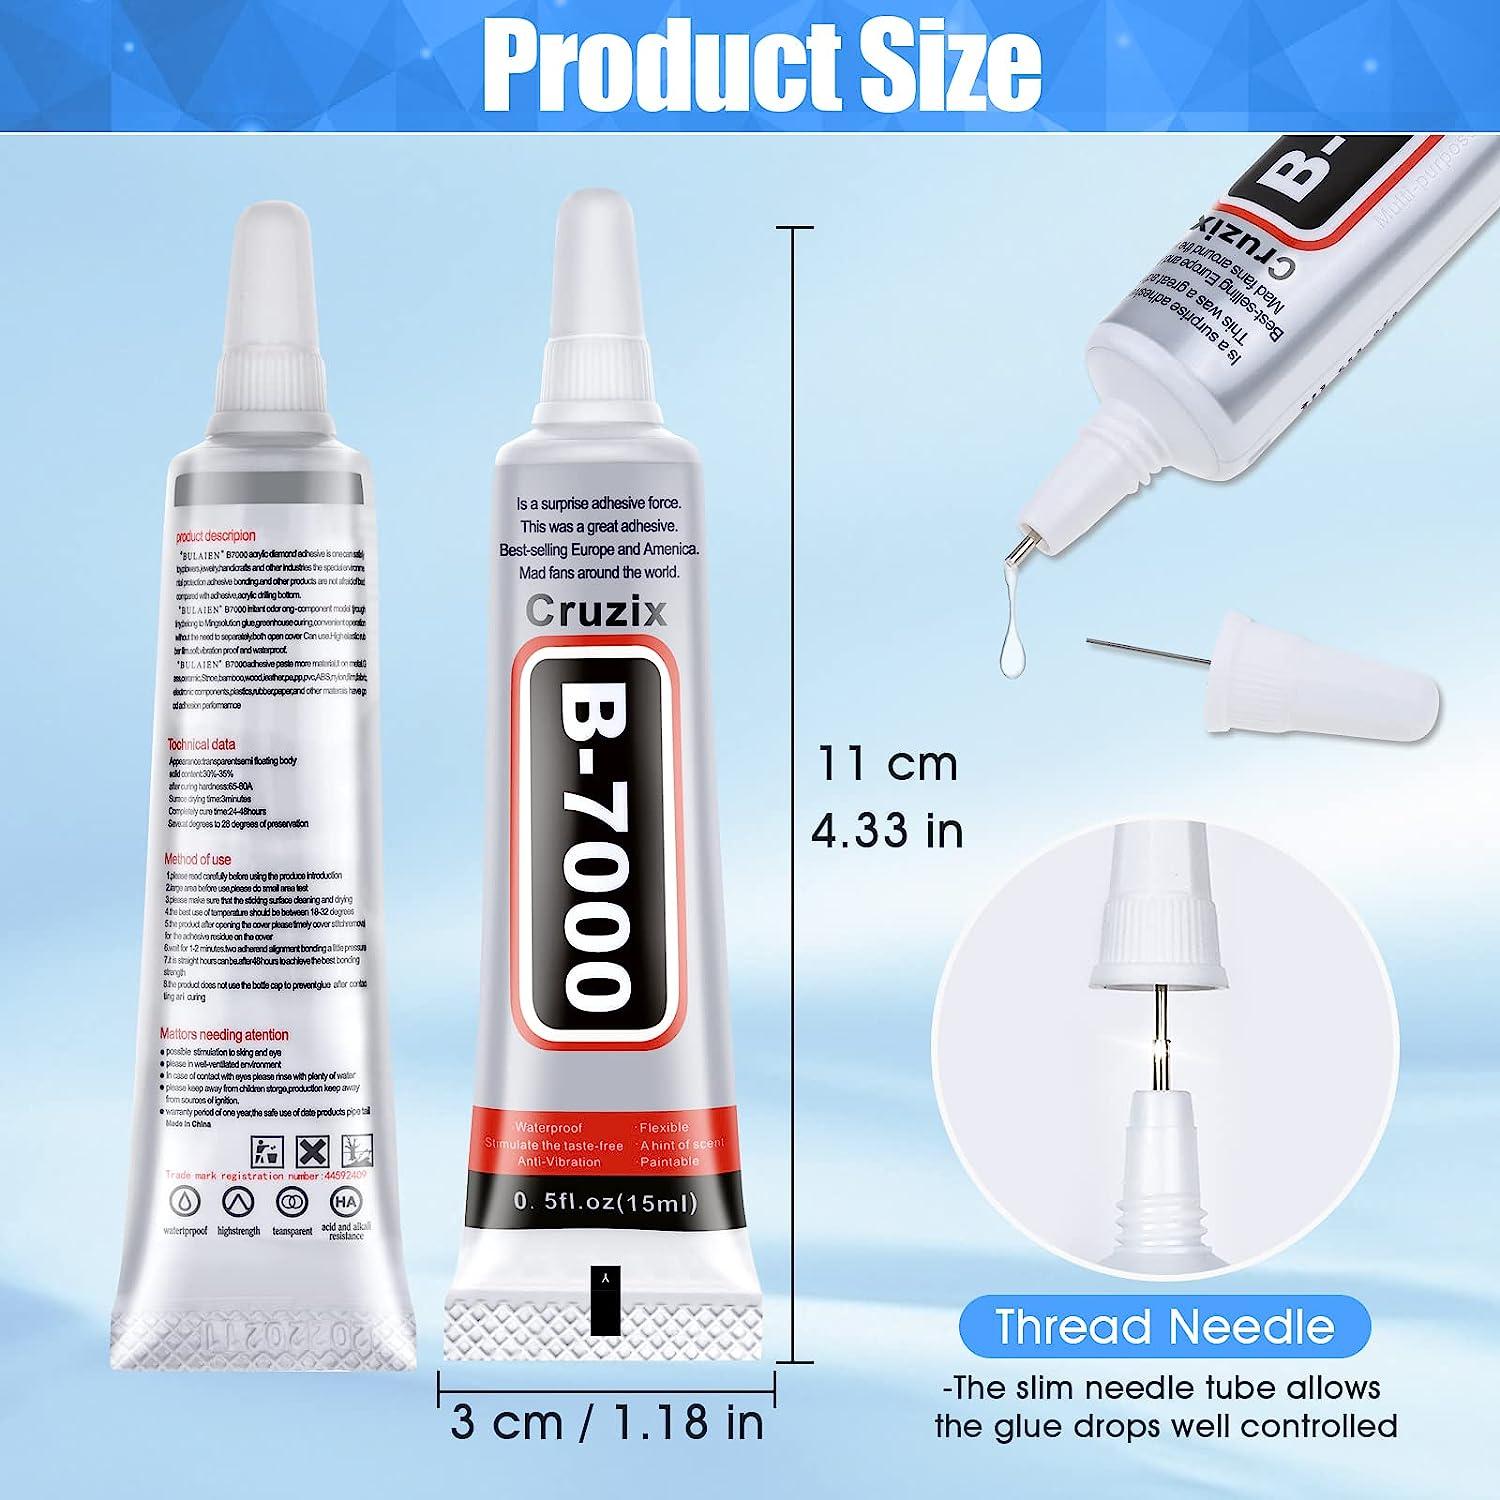 B 7000 Fabric Glue with Precision Tips, Upgrade Industrial Strength  Adhesive B-7000 Glue Clear for Jewelry Crafts DIY, Metal, Stone, Rhinestone  Gems